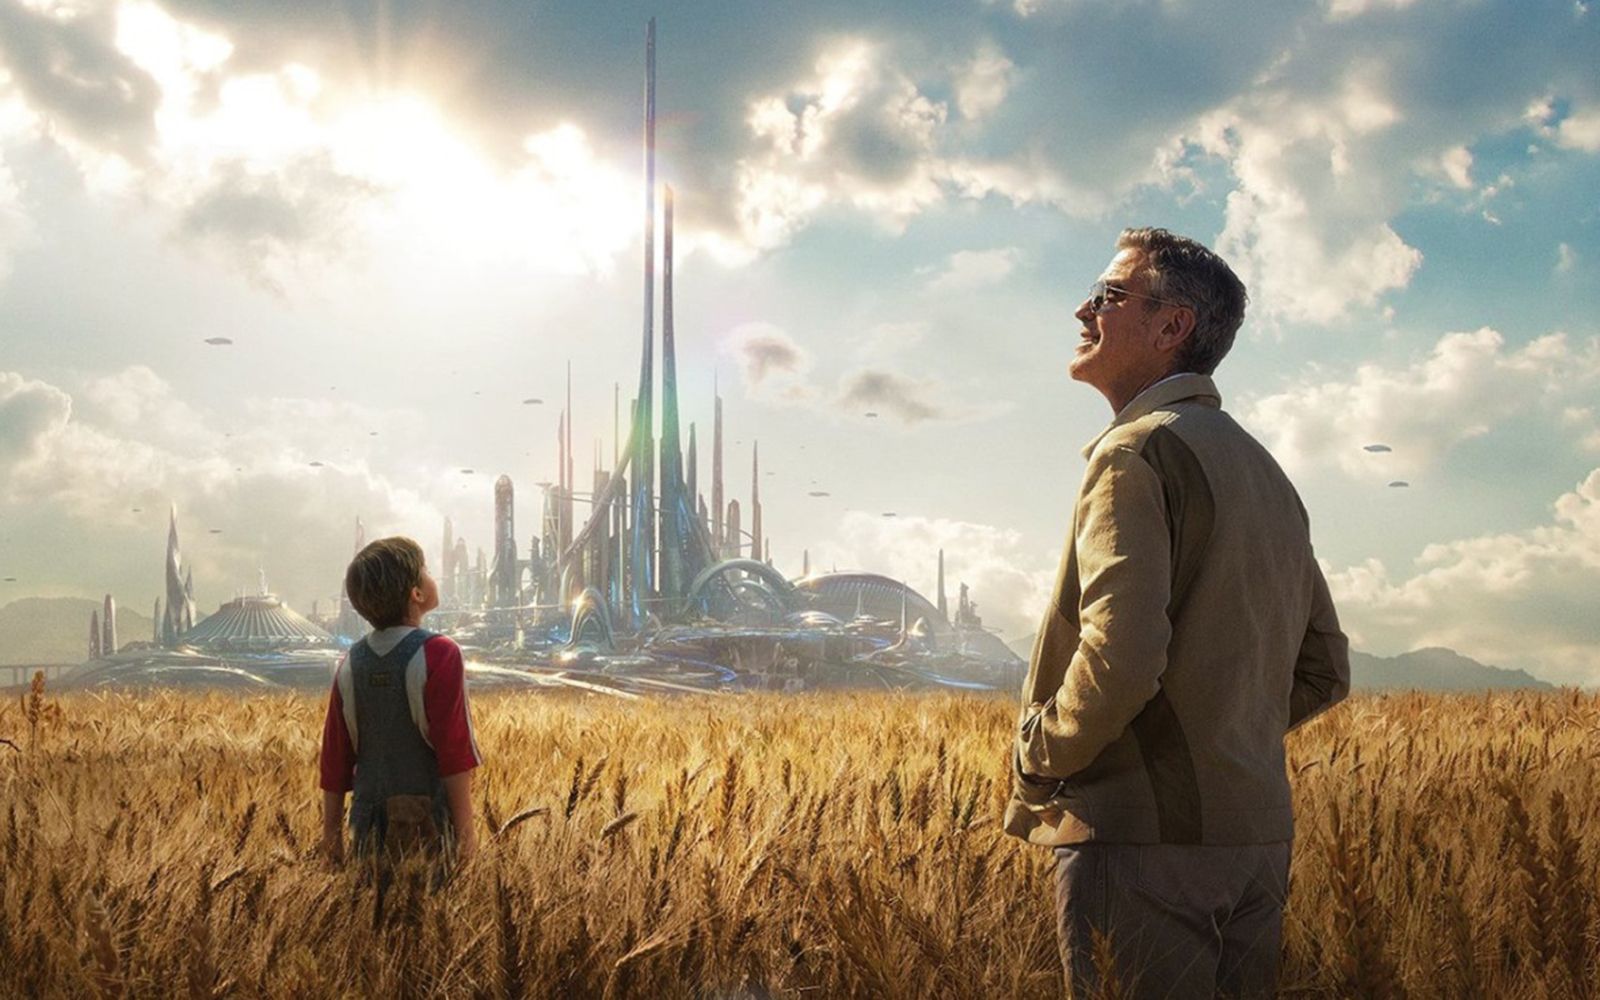 world exclusive tomorrowland video explains why it s best viewed in imax image 1